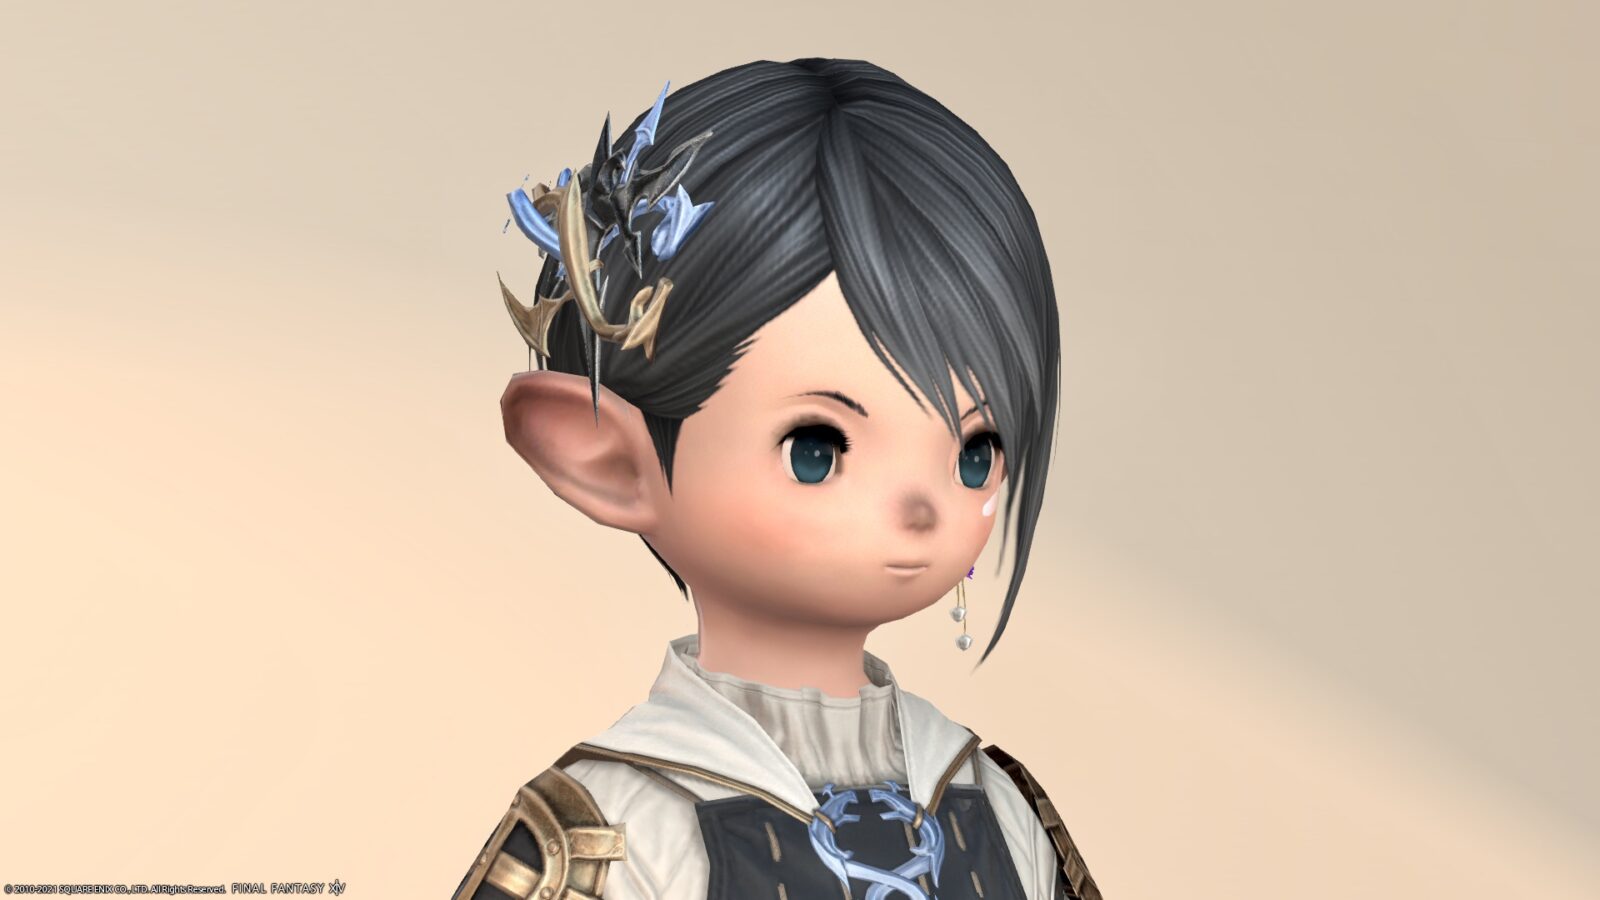 Glamour Ff12 Prince Larsa S Cute Costume The Zadnor Healer Equipment Blade S Of Healing Series Lalafell Men S Ver Ff14ブログ Norirow Note エオルゼア戦記